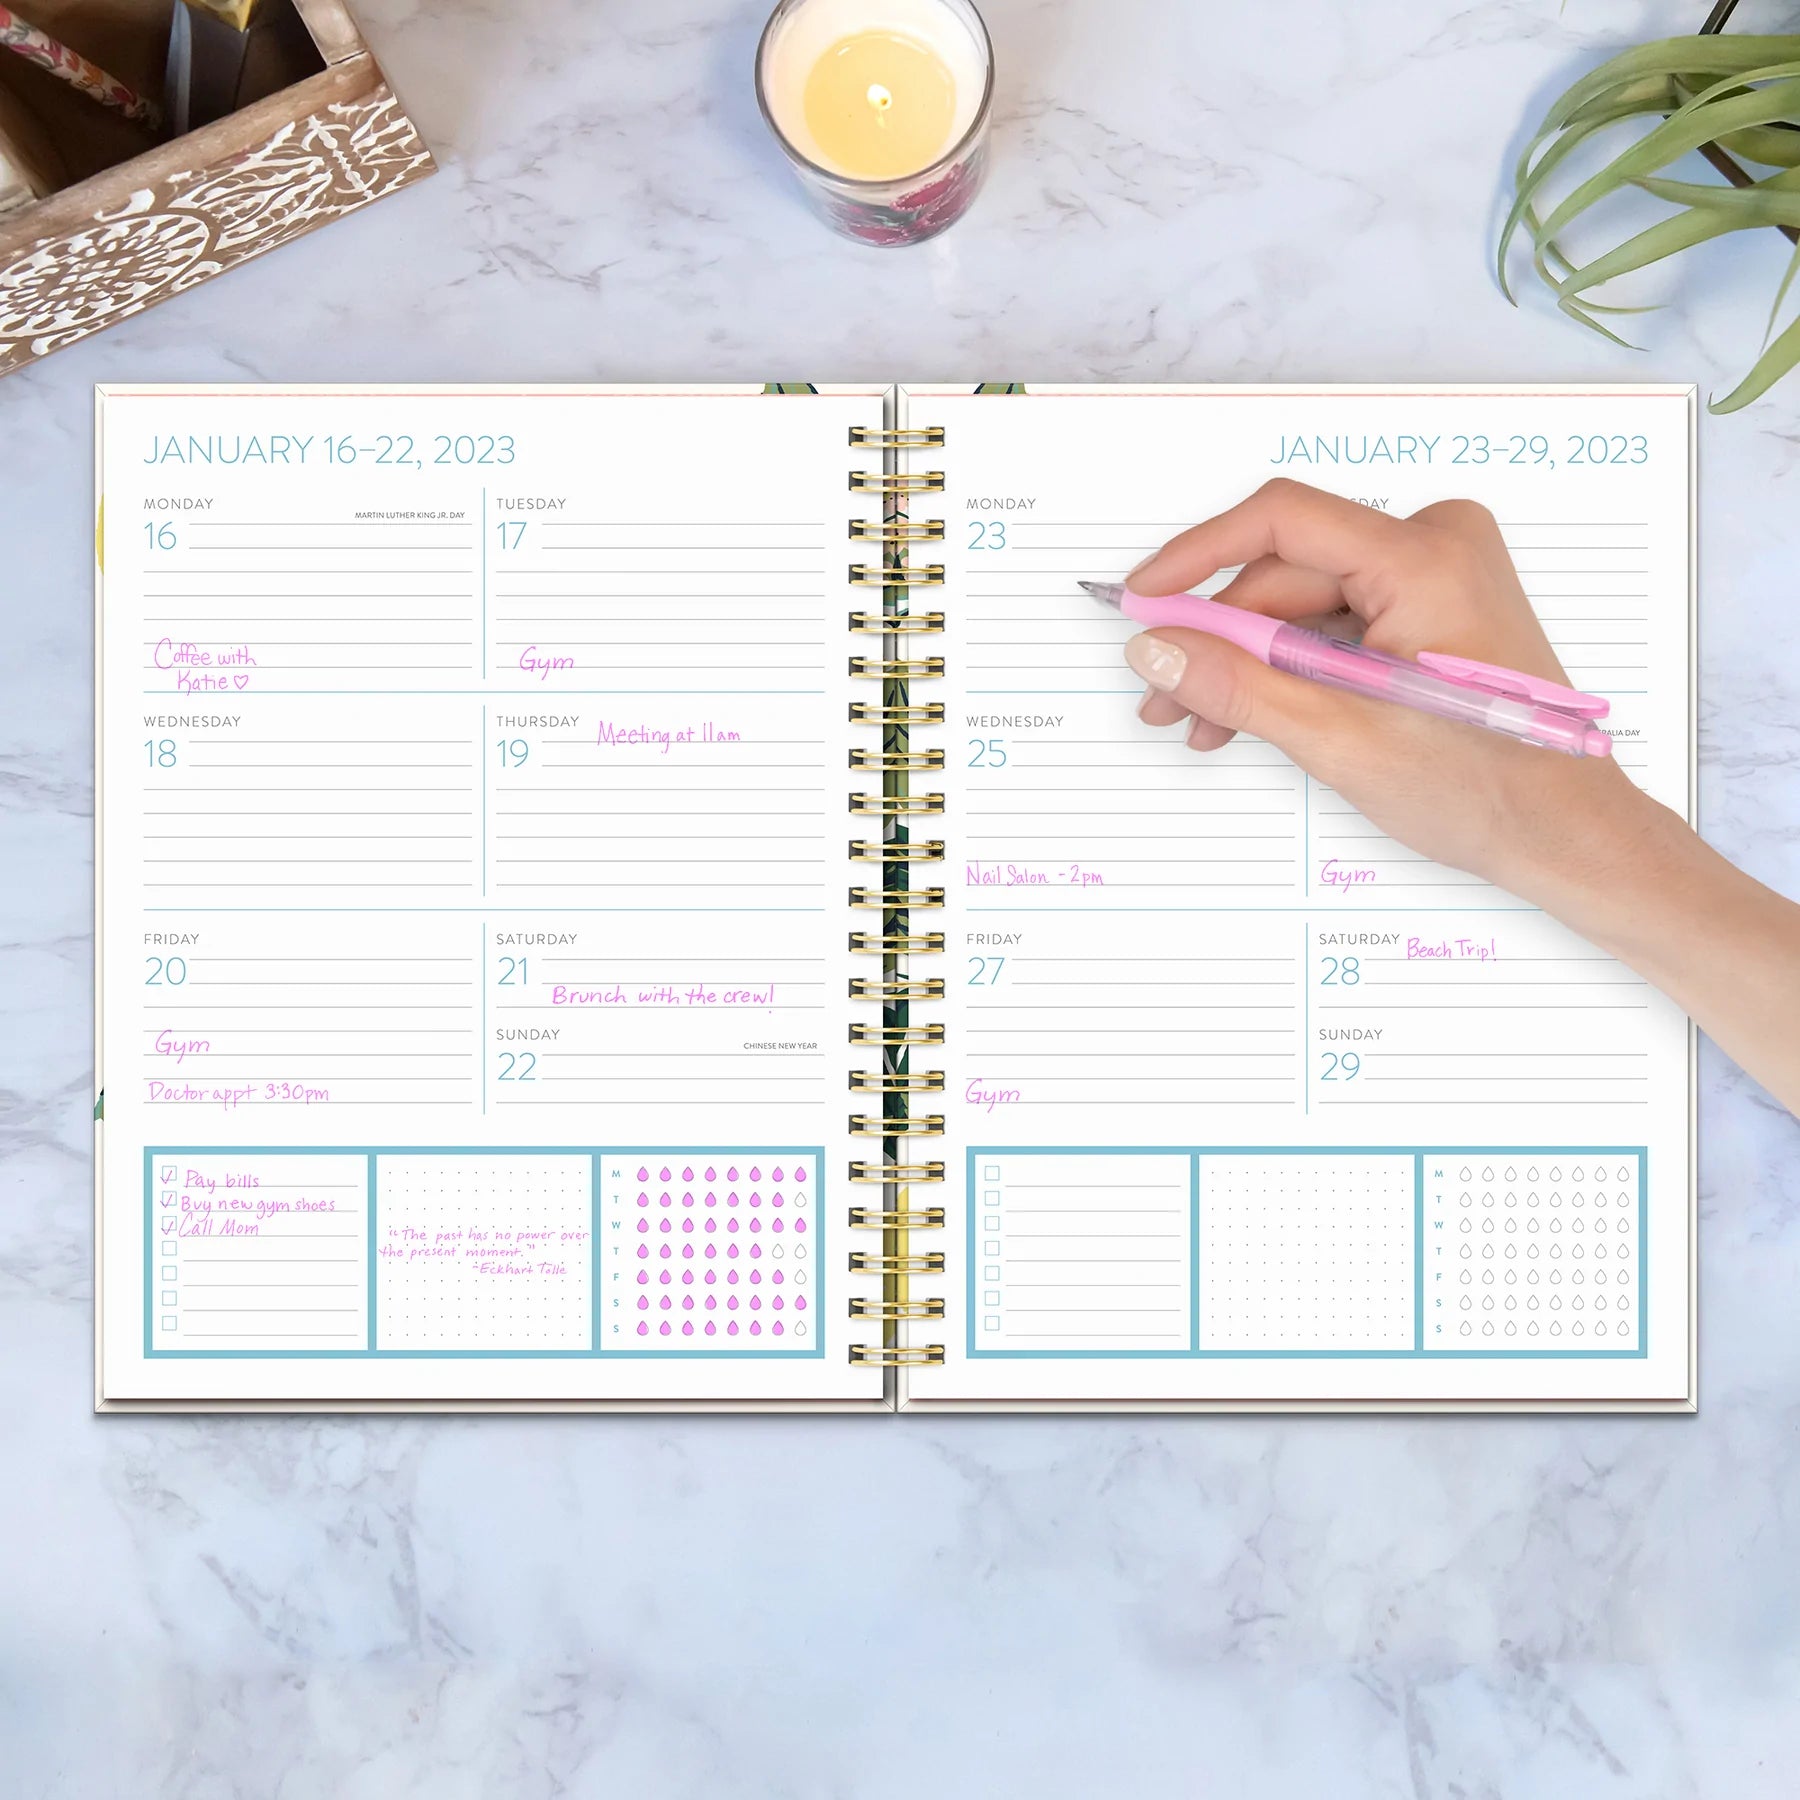 2023 Lemon Tree by Cassidy Demkov (XL Spiral Weekly/Monthly Planner) - Diary/Planner